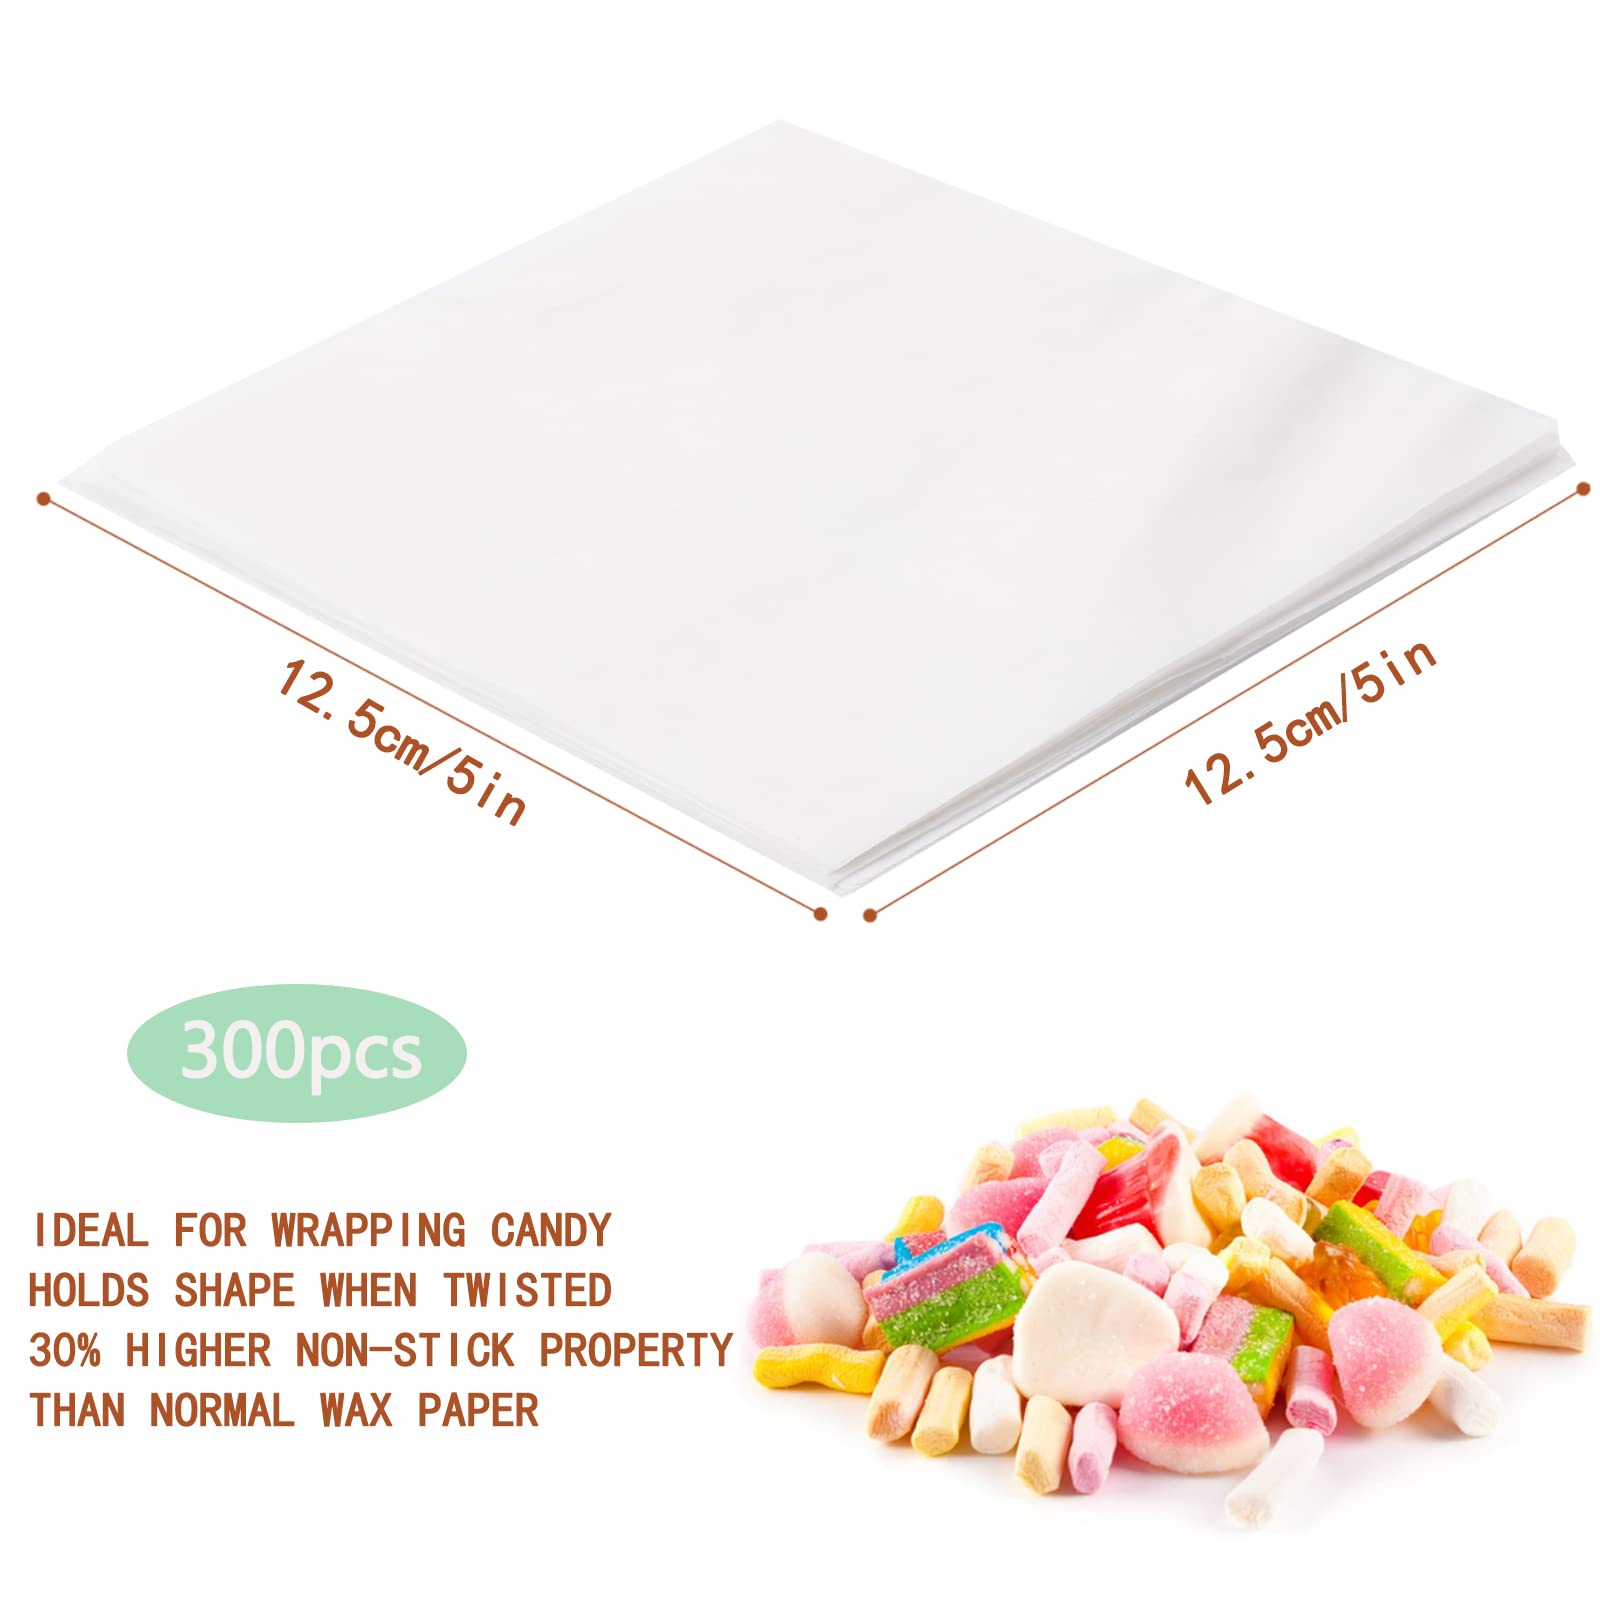 300 Pcs Candy Wrappers for Caramels Non Stick Wax Paper Sheets for Food, 5x5 Inch Parchment Paper Squares Caramel Wrappers Precut Candy Wrapper Paper for Chocolate, Patty, Caramel, Cheese